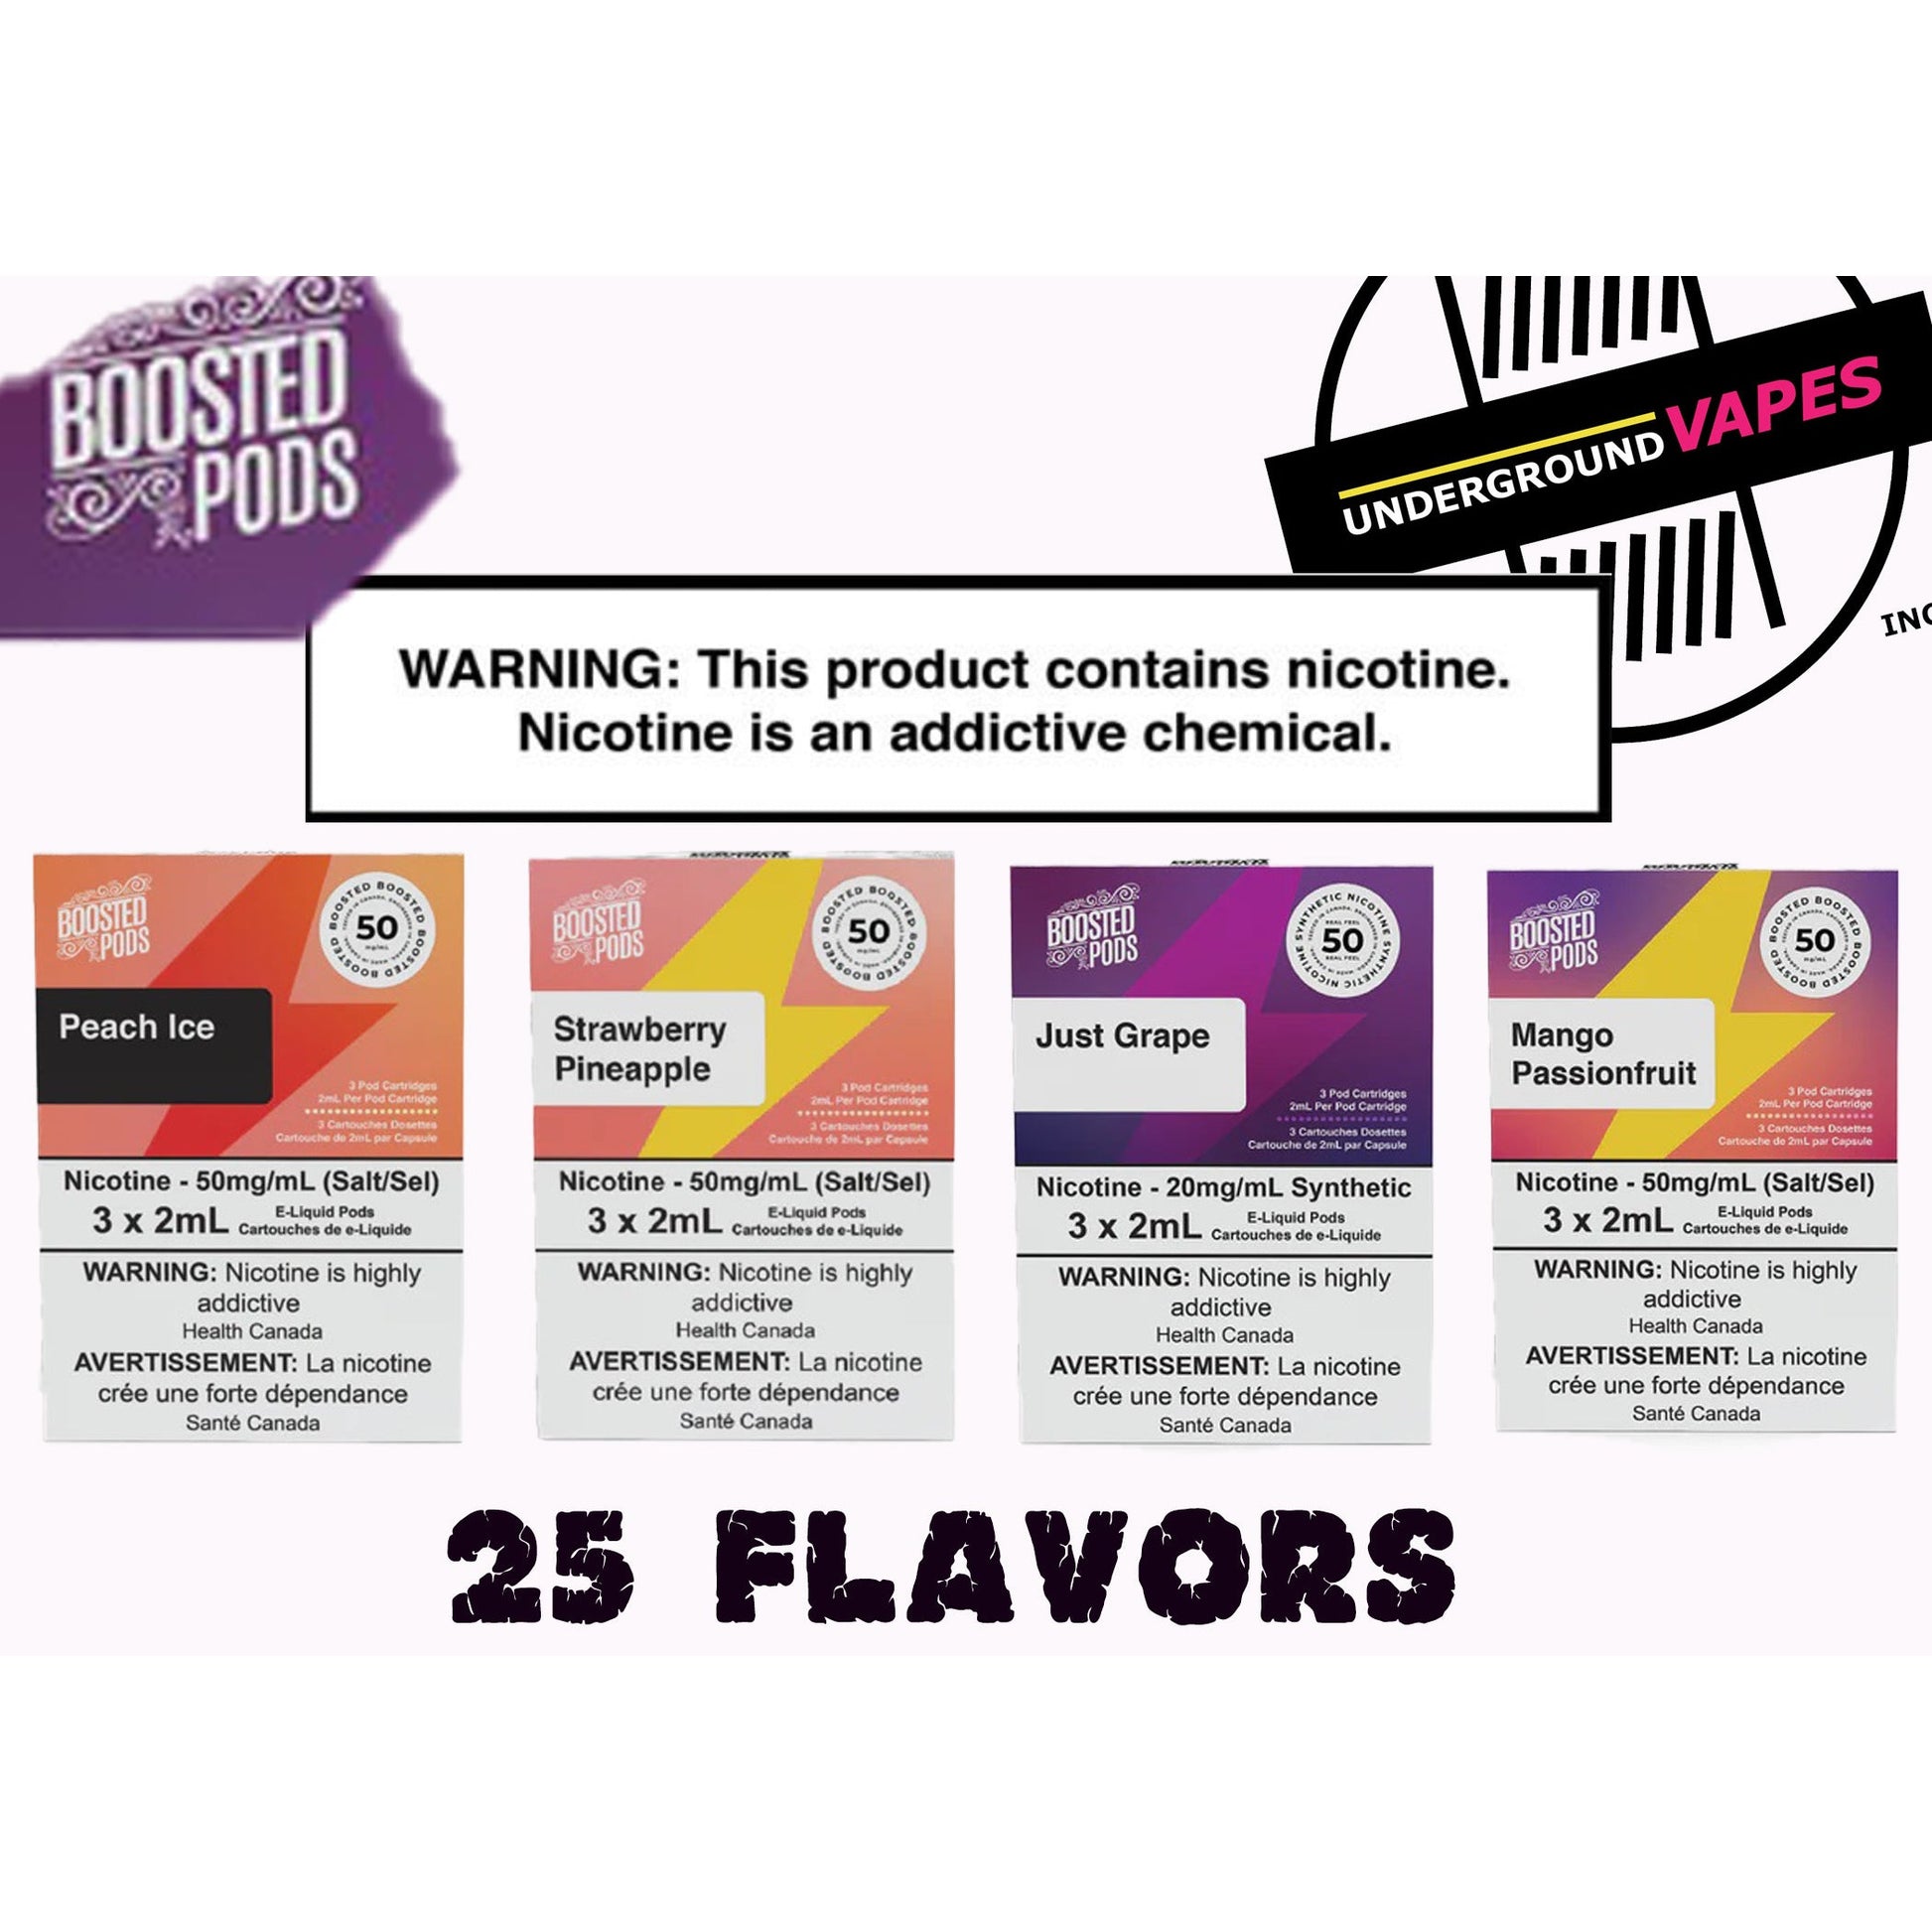 BOOSTED STLTH COMPATIBLE PODS 3 P/K (SEE FLAVOR MENU) EXCISE TAXED - Underground Vapes Inc - Cambridge